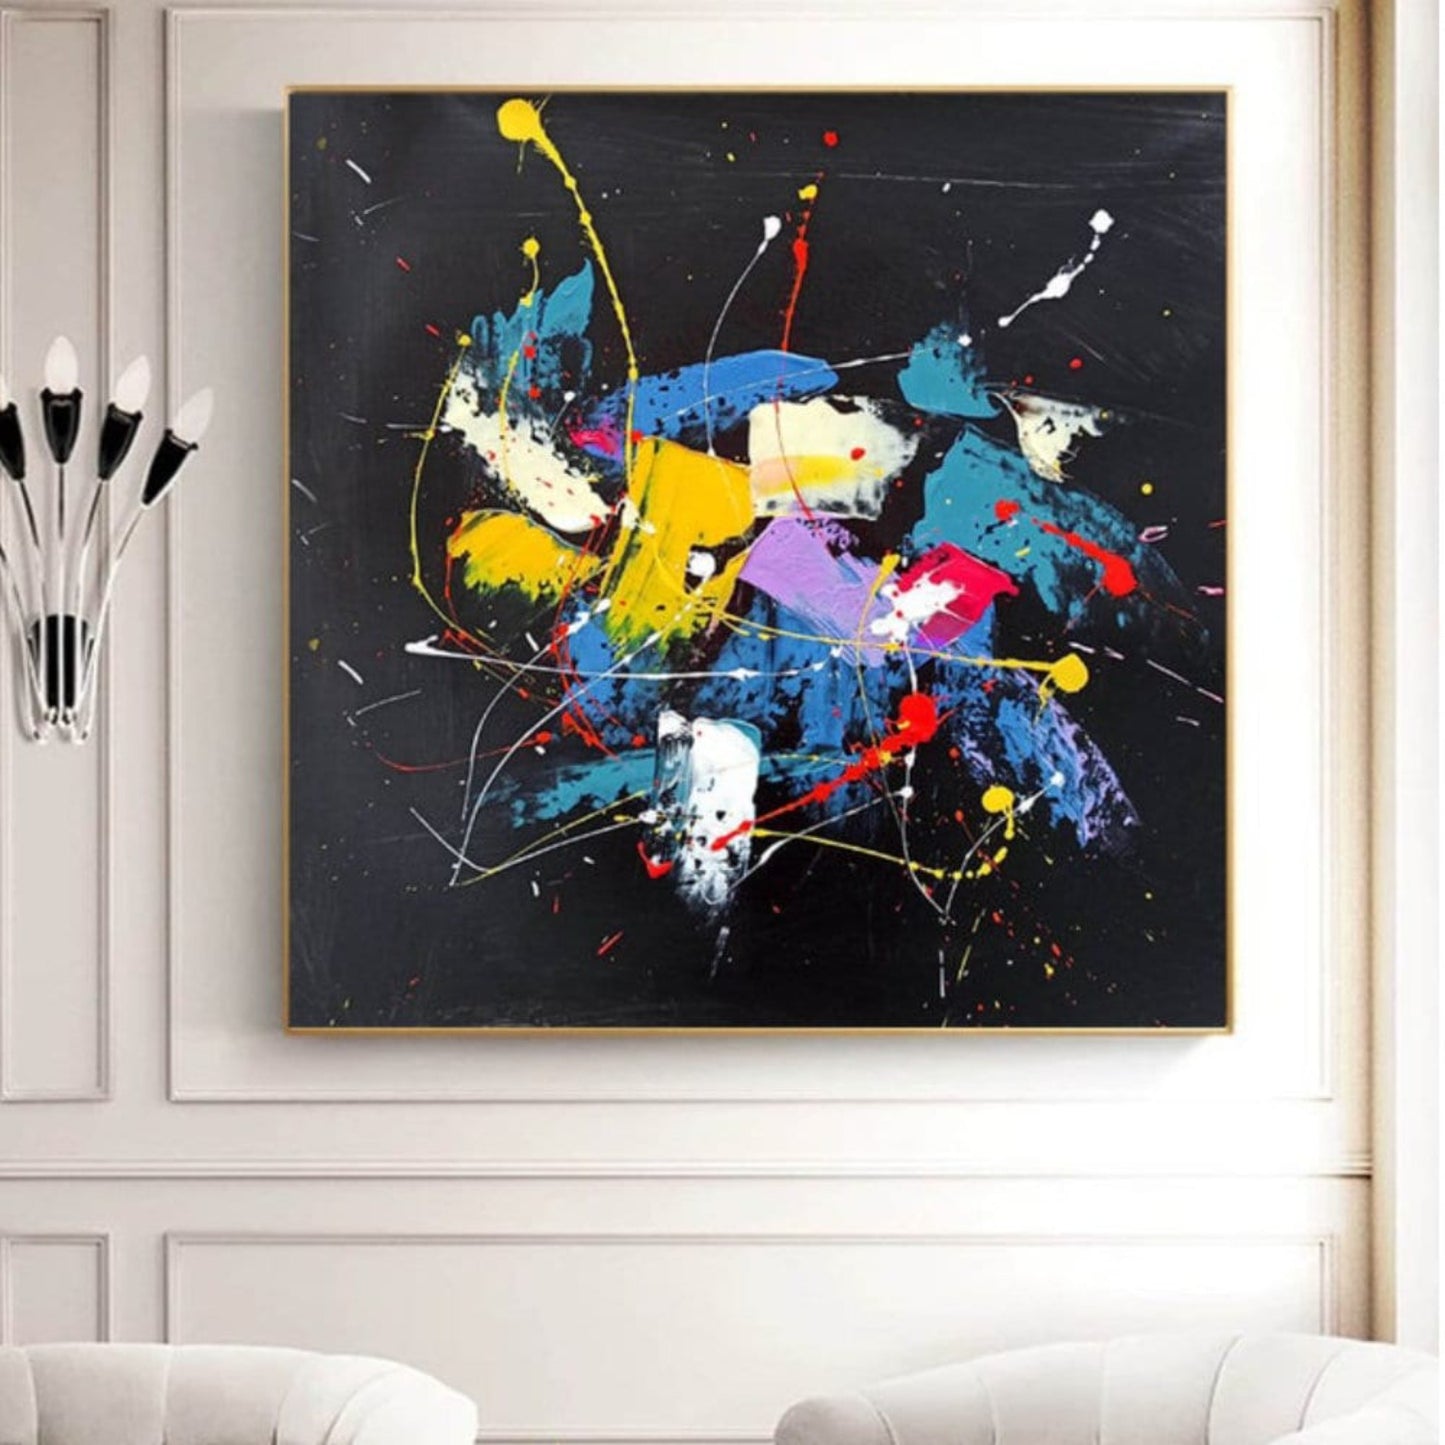 Abstract Black Iconic Jackson Pollock Oil Painting